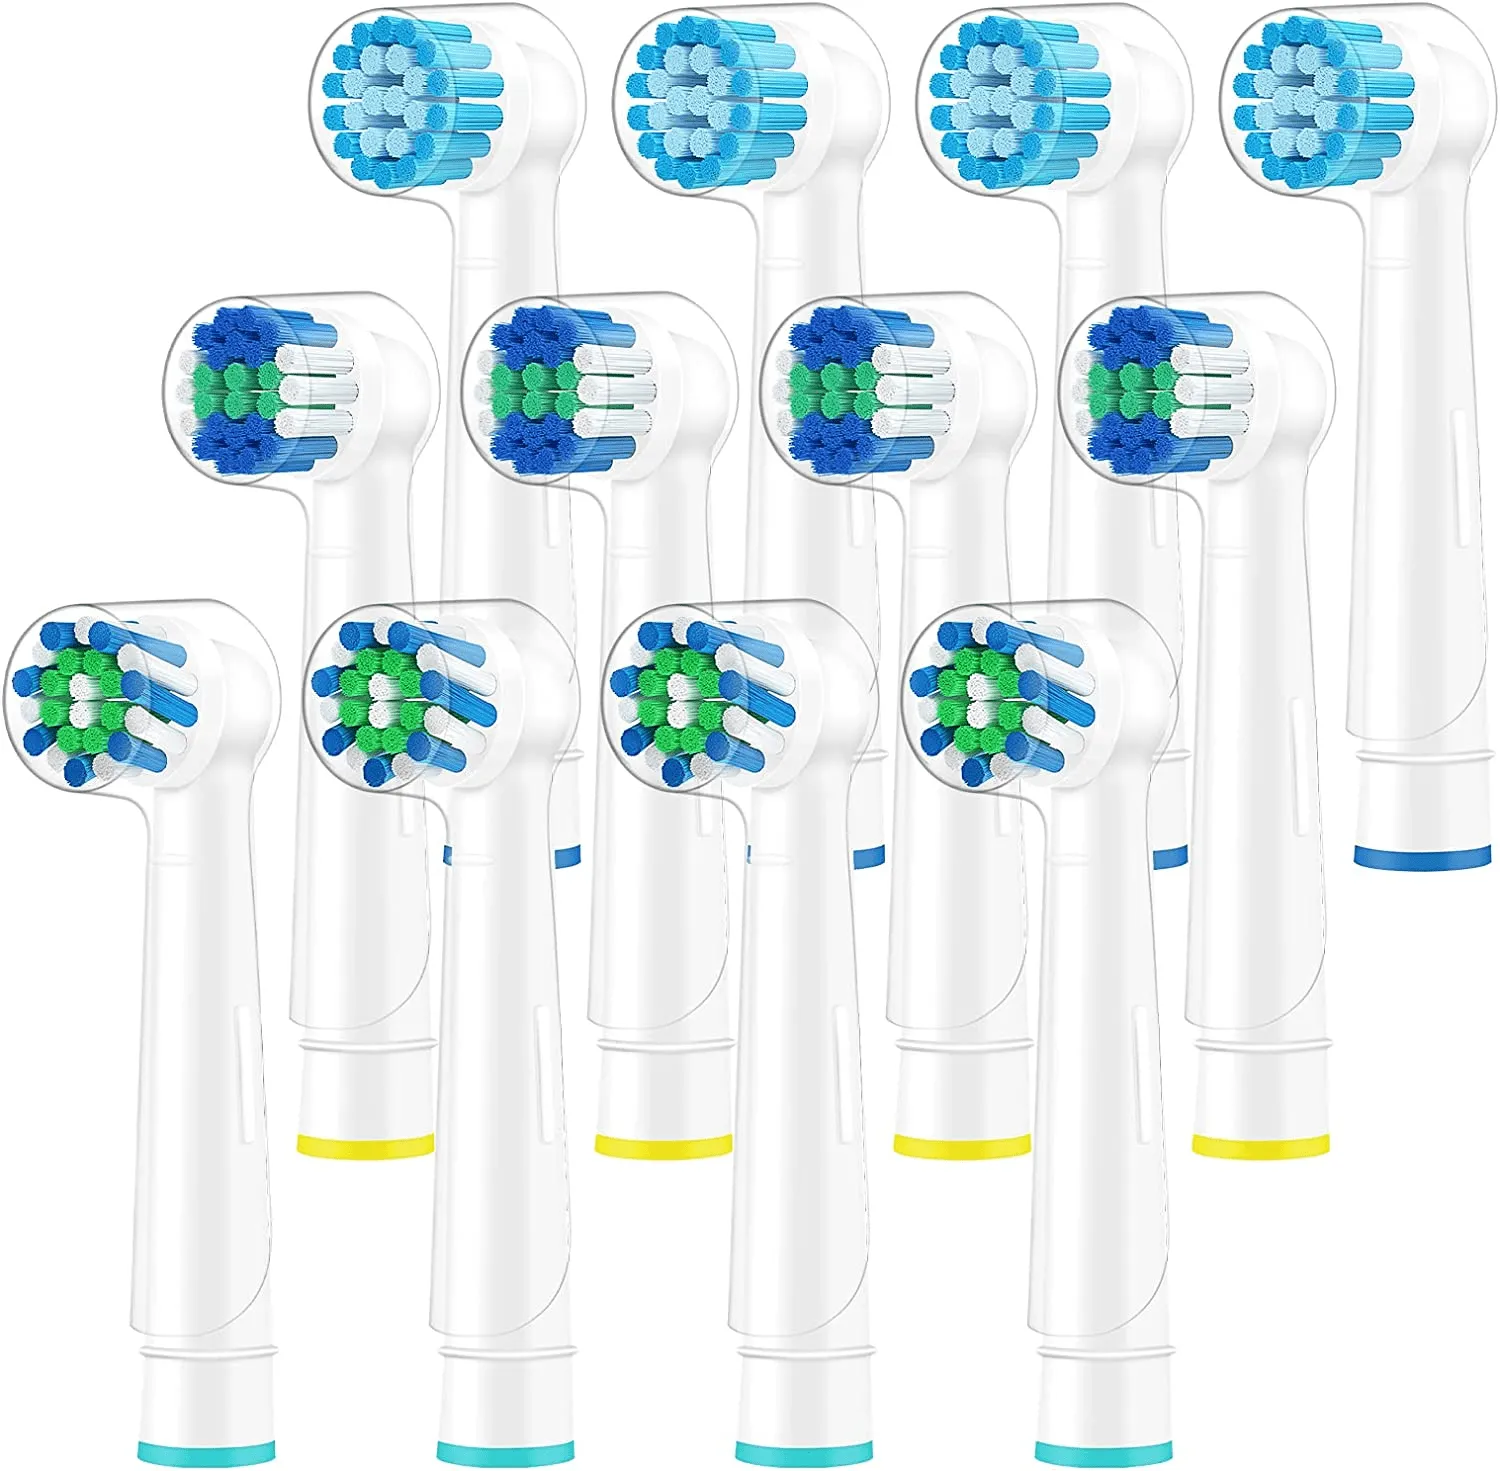 Toothbrush Heads Compatible Refills for Most Oral-B